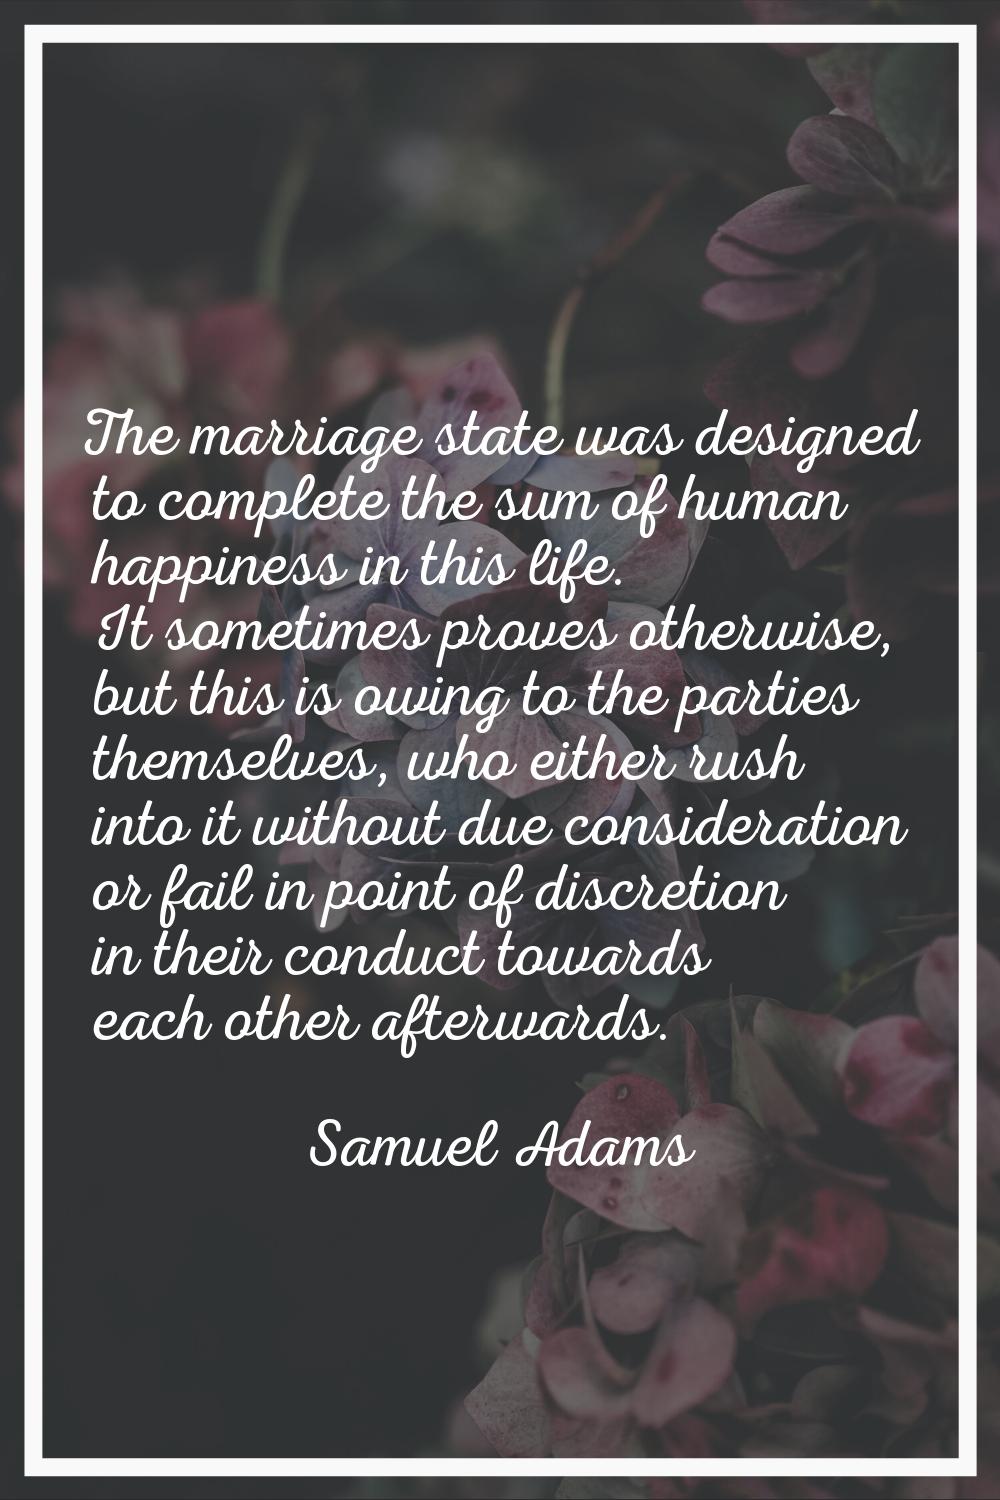 The marriage state was designed to complete the sum of human happiness in this life. It sometimes p